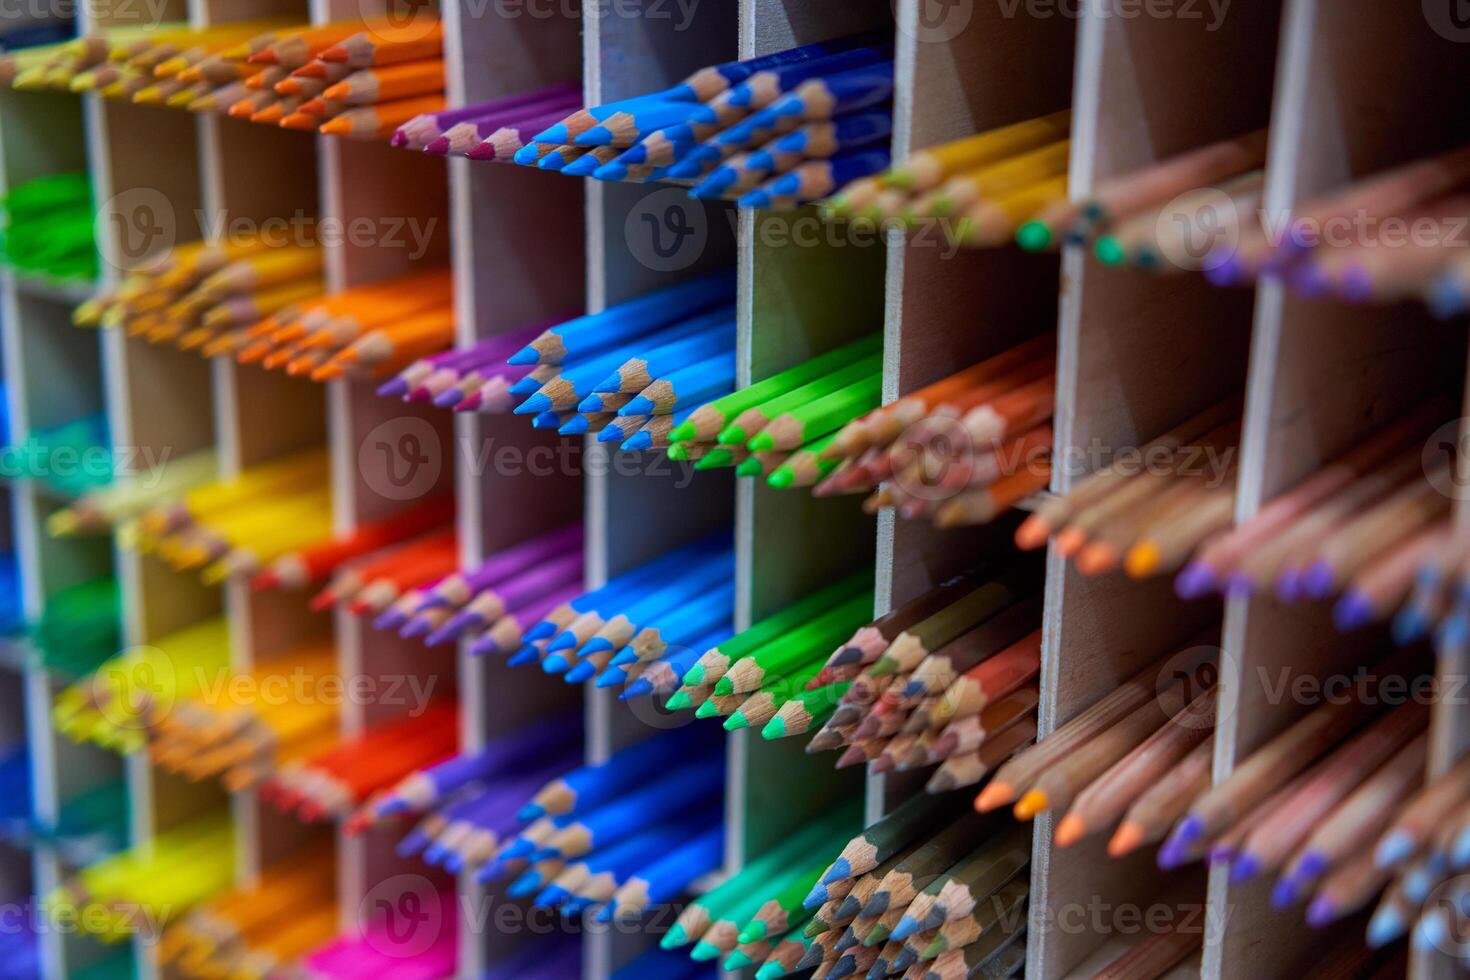 Showcase with colored pencils for drawing in the store for artists or stationery photo